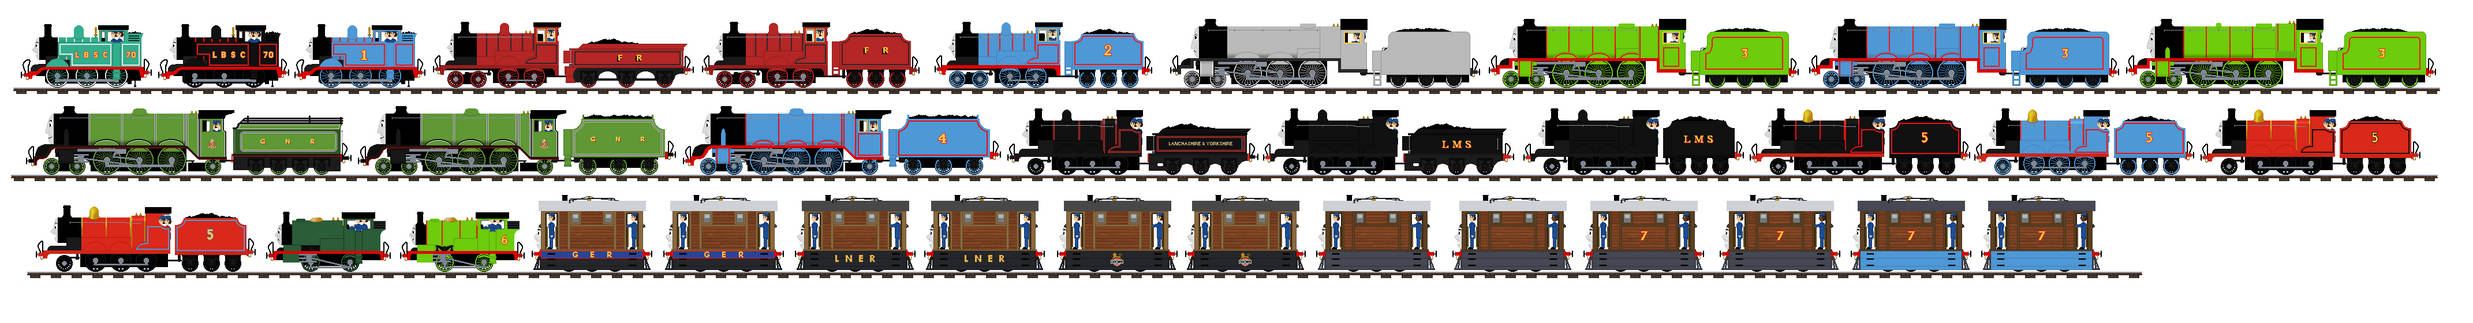 Thomas and Friends Pilot Engines